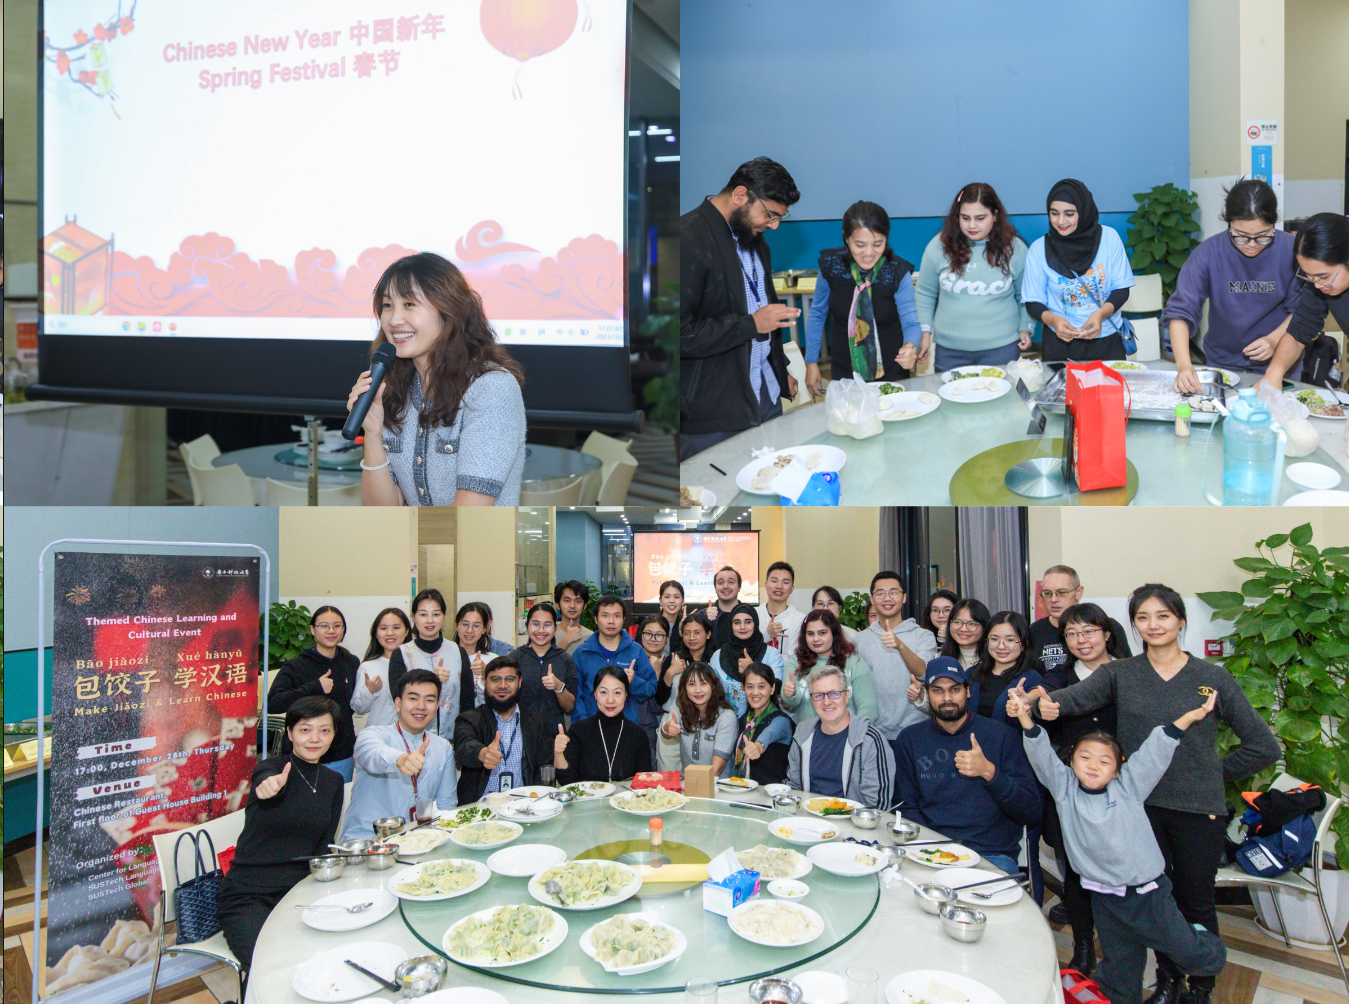 International faculty and students make jiaozi and enjoy the holiday season together